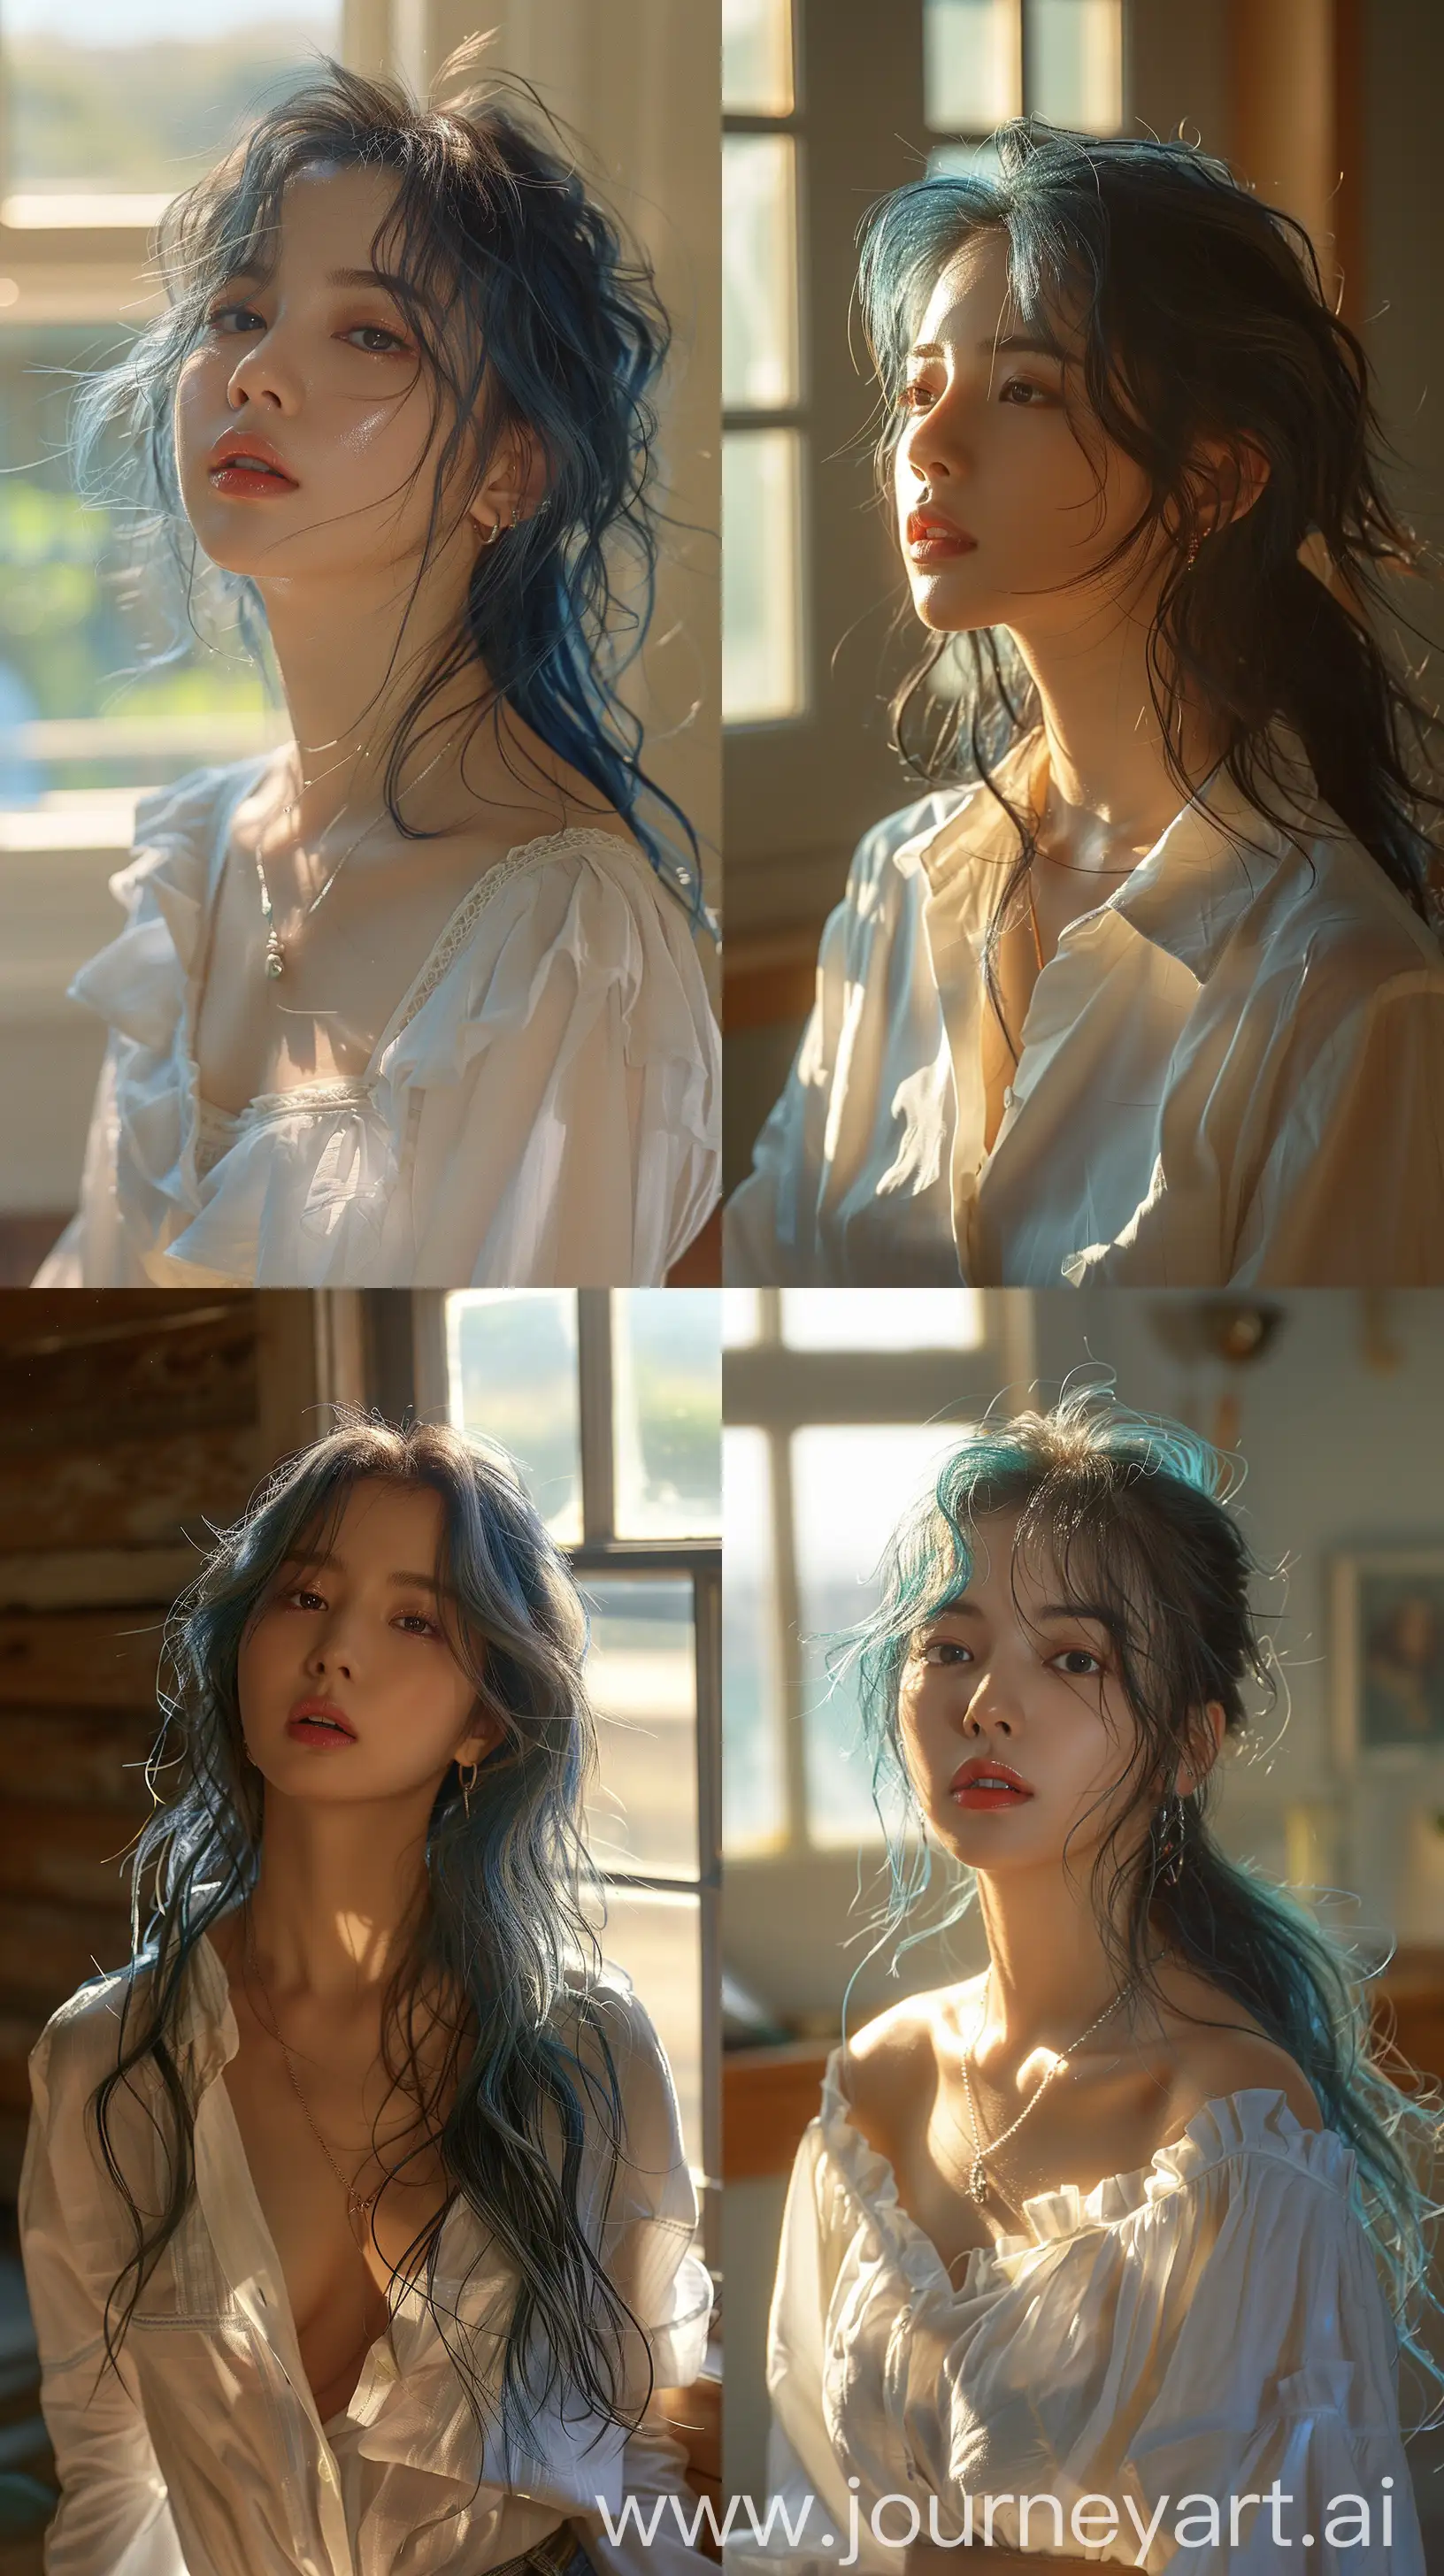 Blackpinks-Jennie-in-White-Shirt-with-Blue-Wolfcut-Hair-in-Sunlit-Room